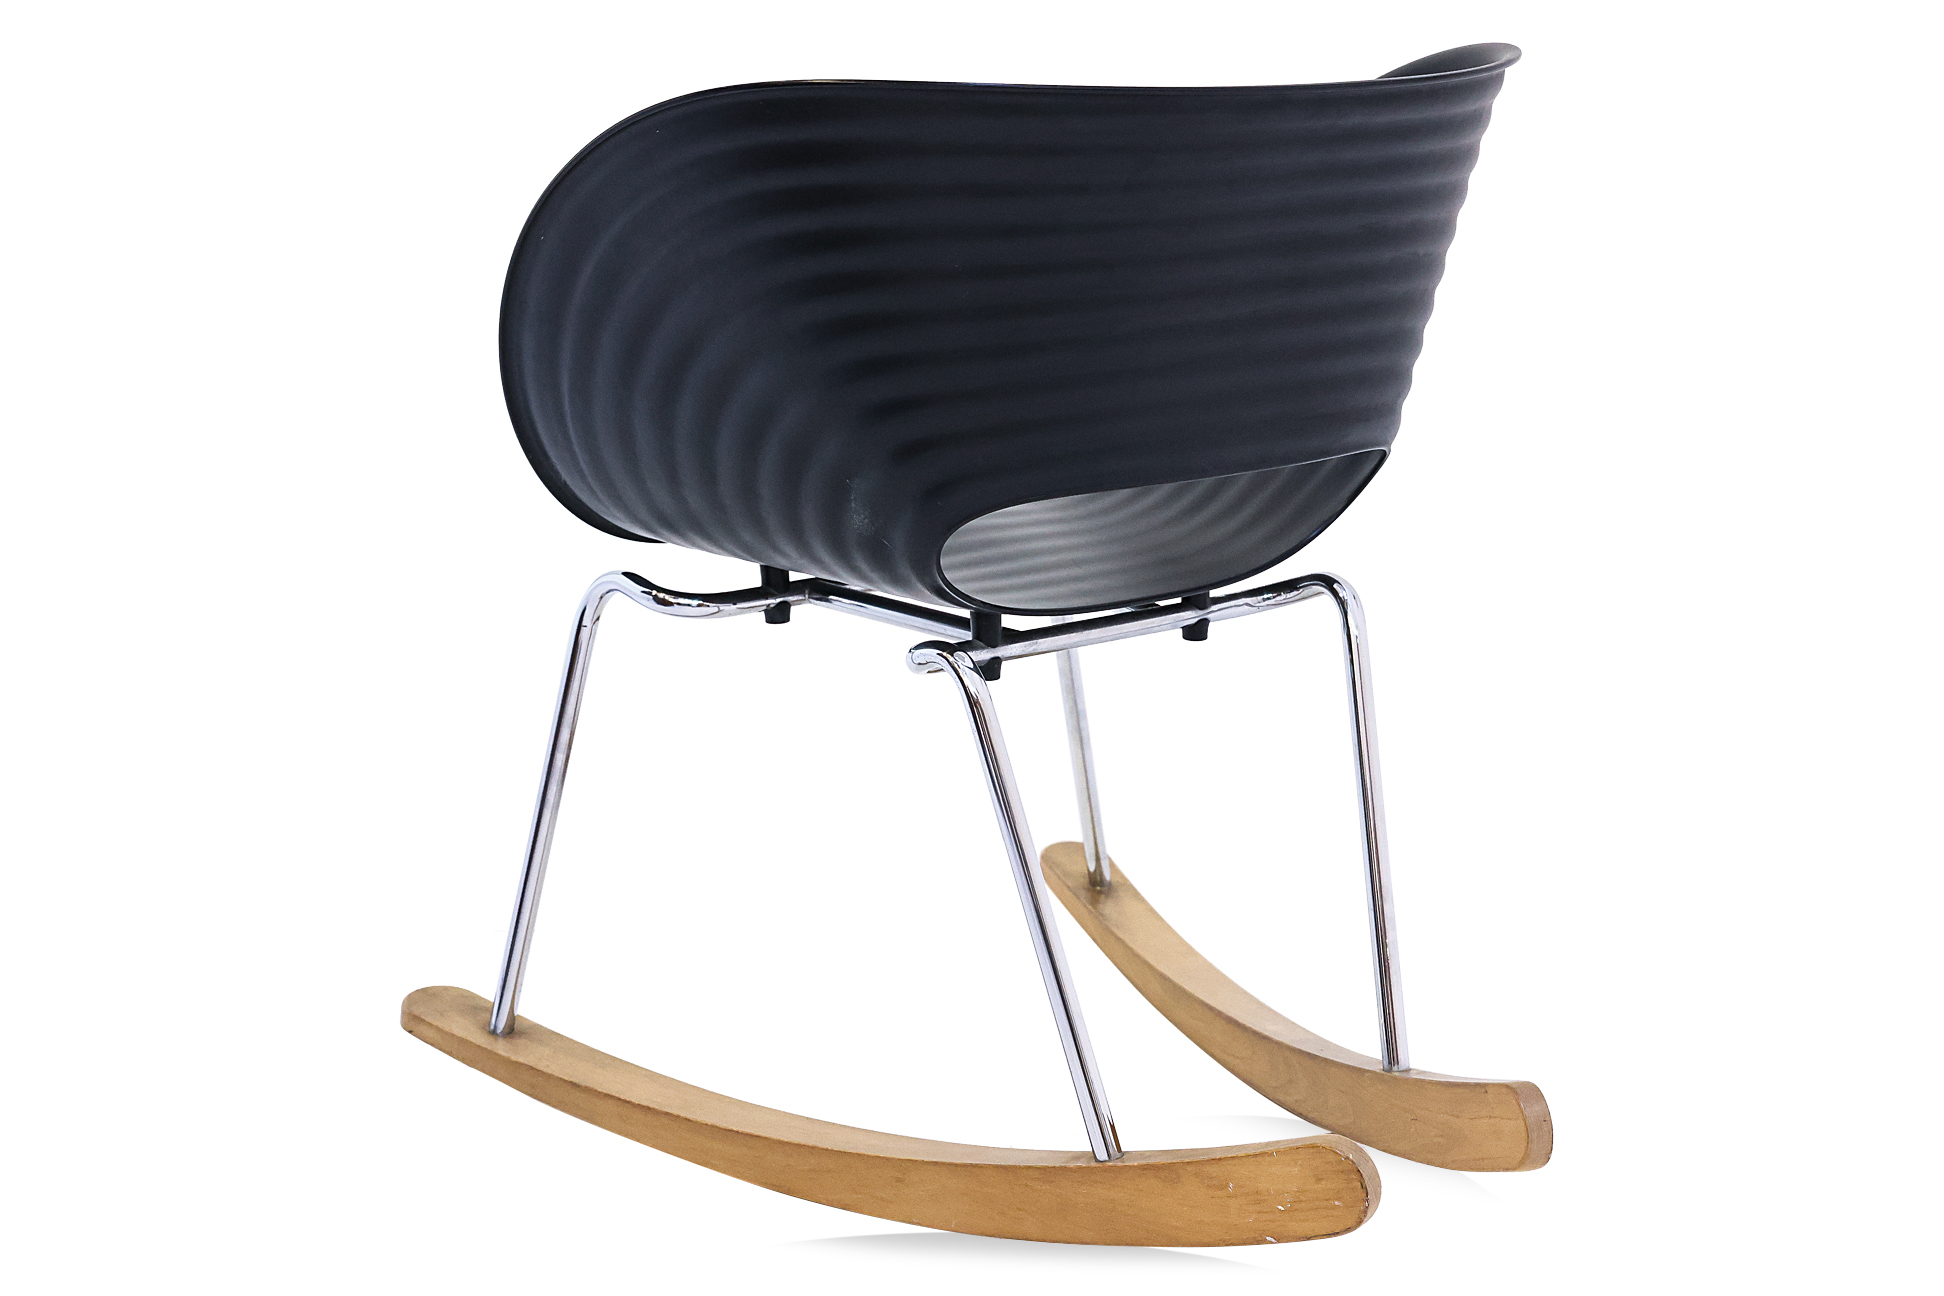 RON ARAD FOR VITRA - 'TOM VAC' ROCKING CHAIR - Image 3 of 3